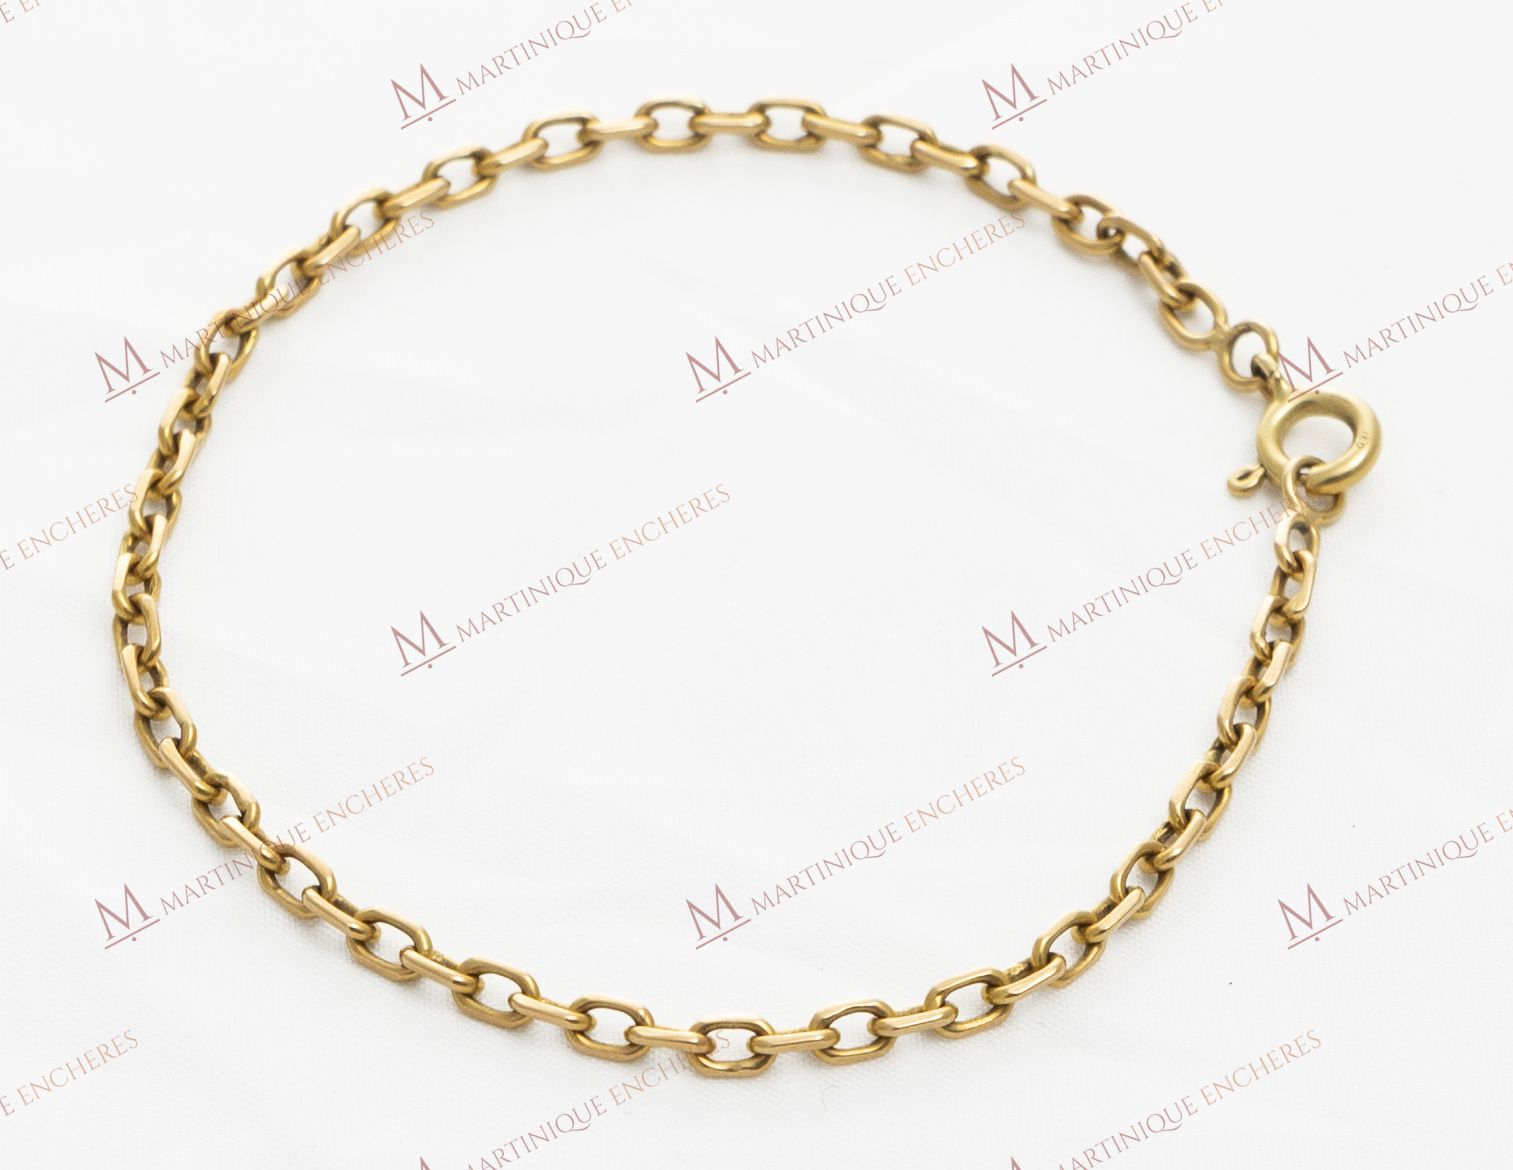 Null Mesh bracelet in yellow gold 750 thousandths 18K.
Weight : 6,18 g.